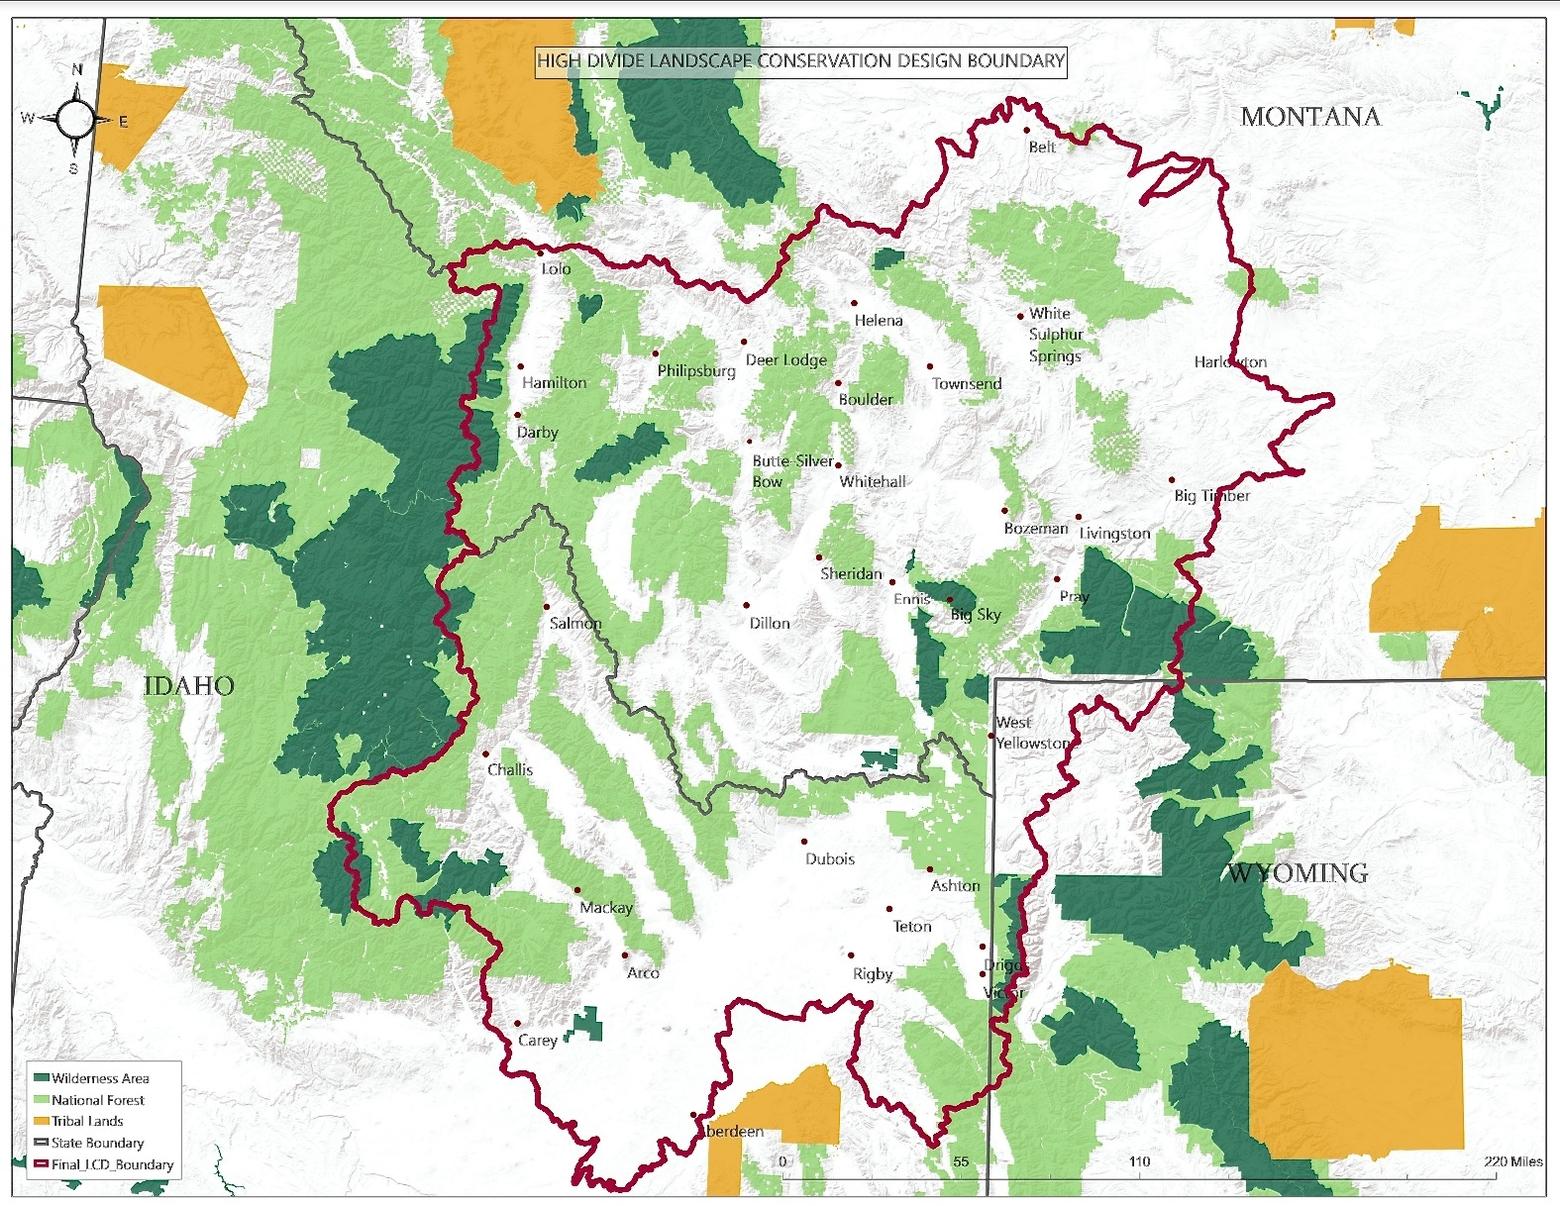 The High Divide is an important ecological link between Greater Yellowstone and wildlands/rural landscapes to the north. Graphic courtesy High Divide Collaborative